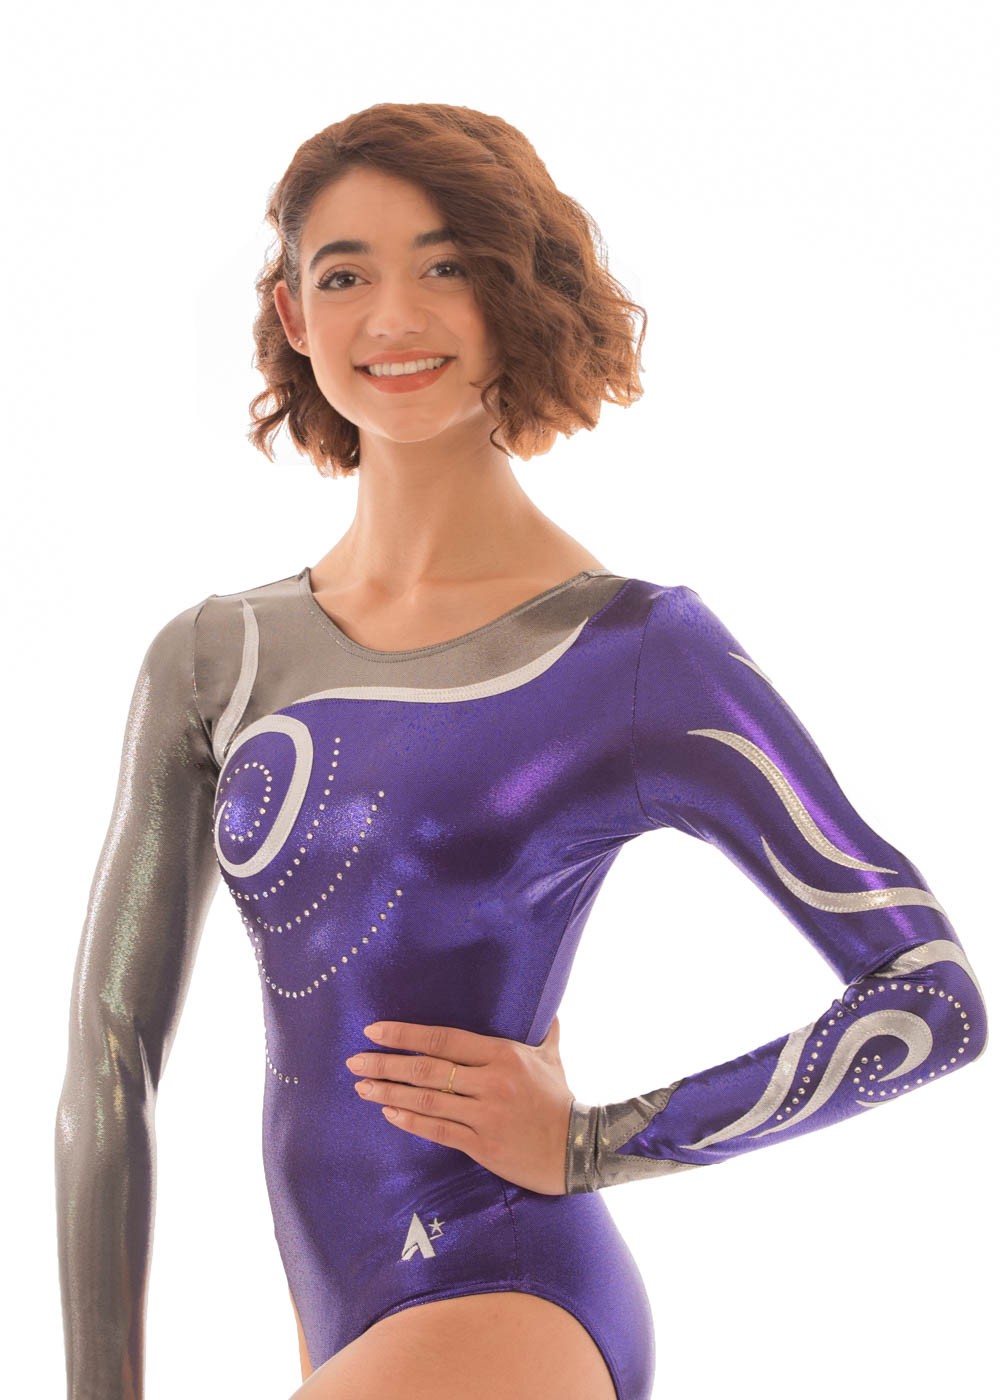 JESSICA - K178: - Long sleeved gymnastics leotard in Purple, Silver and ...